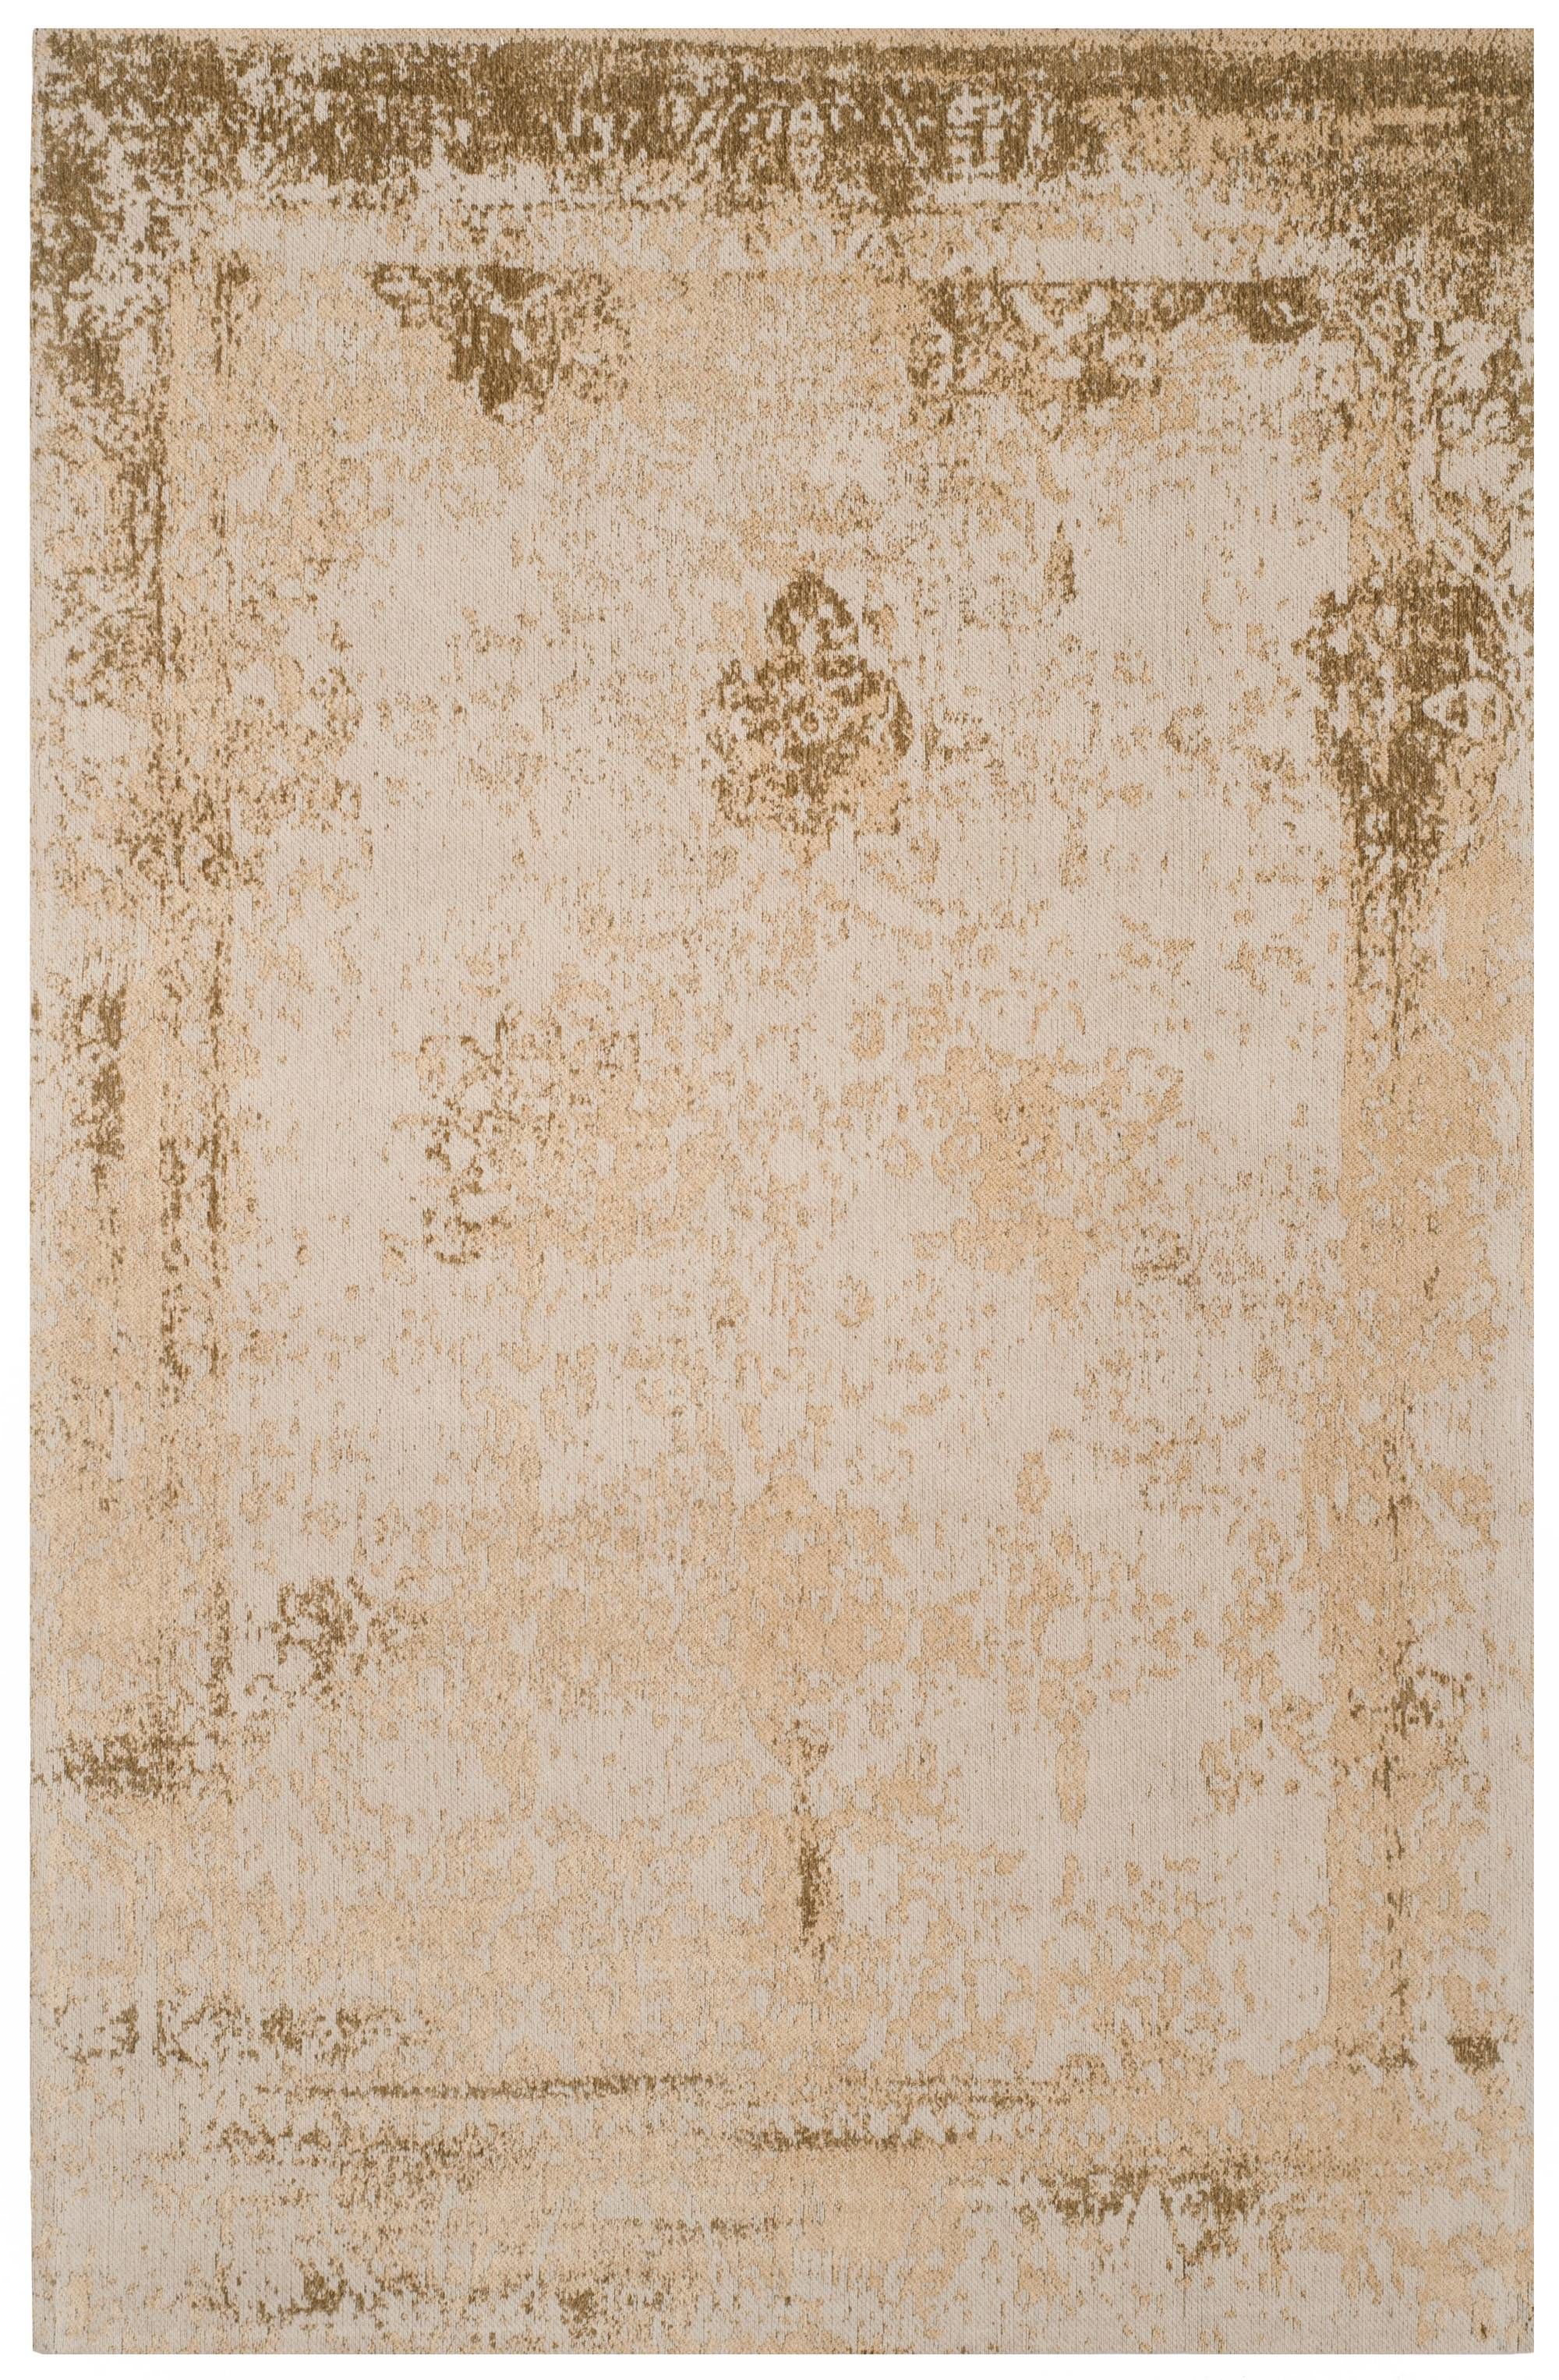 Safavieh Classic Vintage Collection CLV125B Distressed Cotton Area Rug Red 5' x 8' 